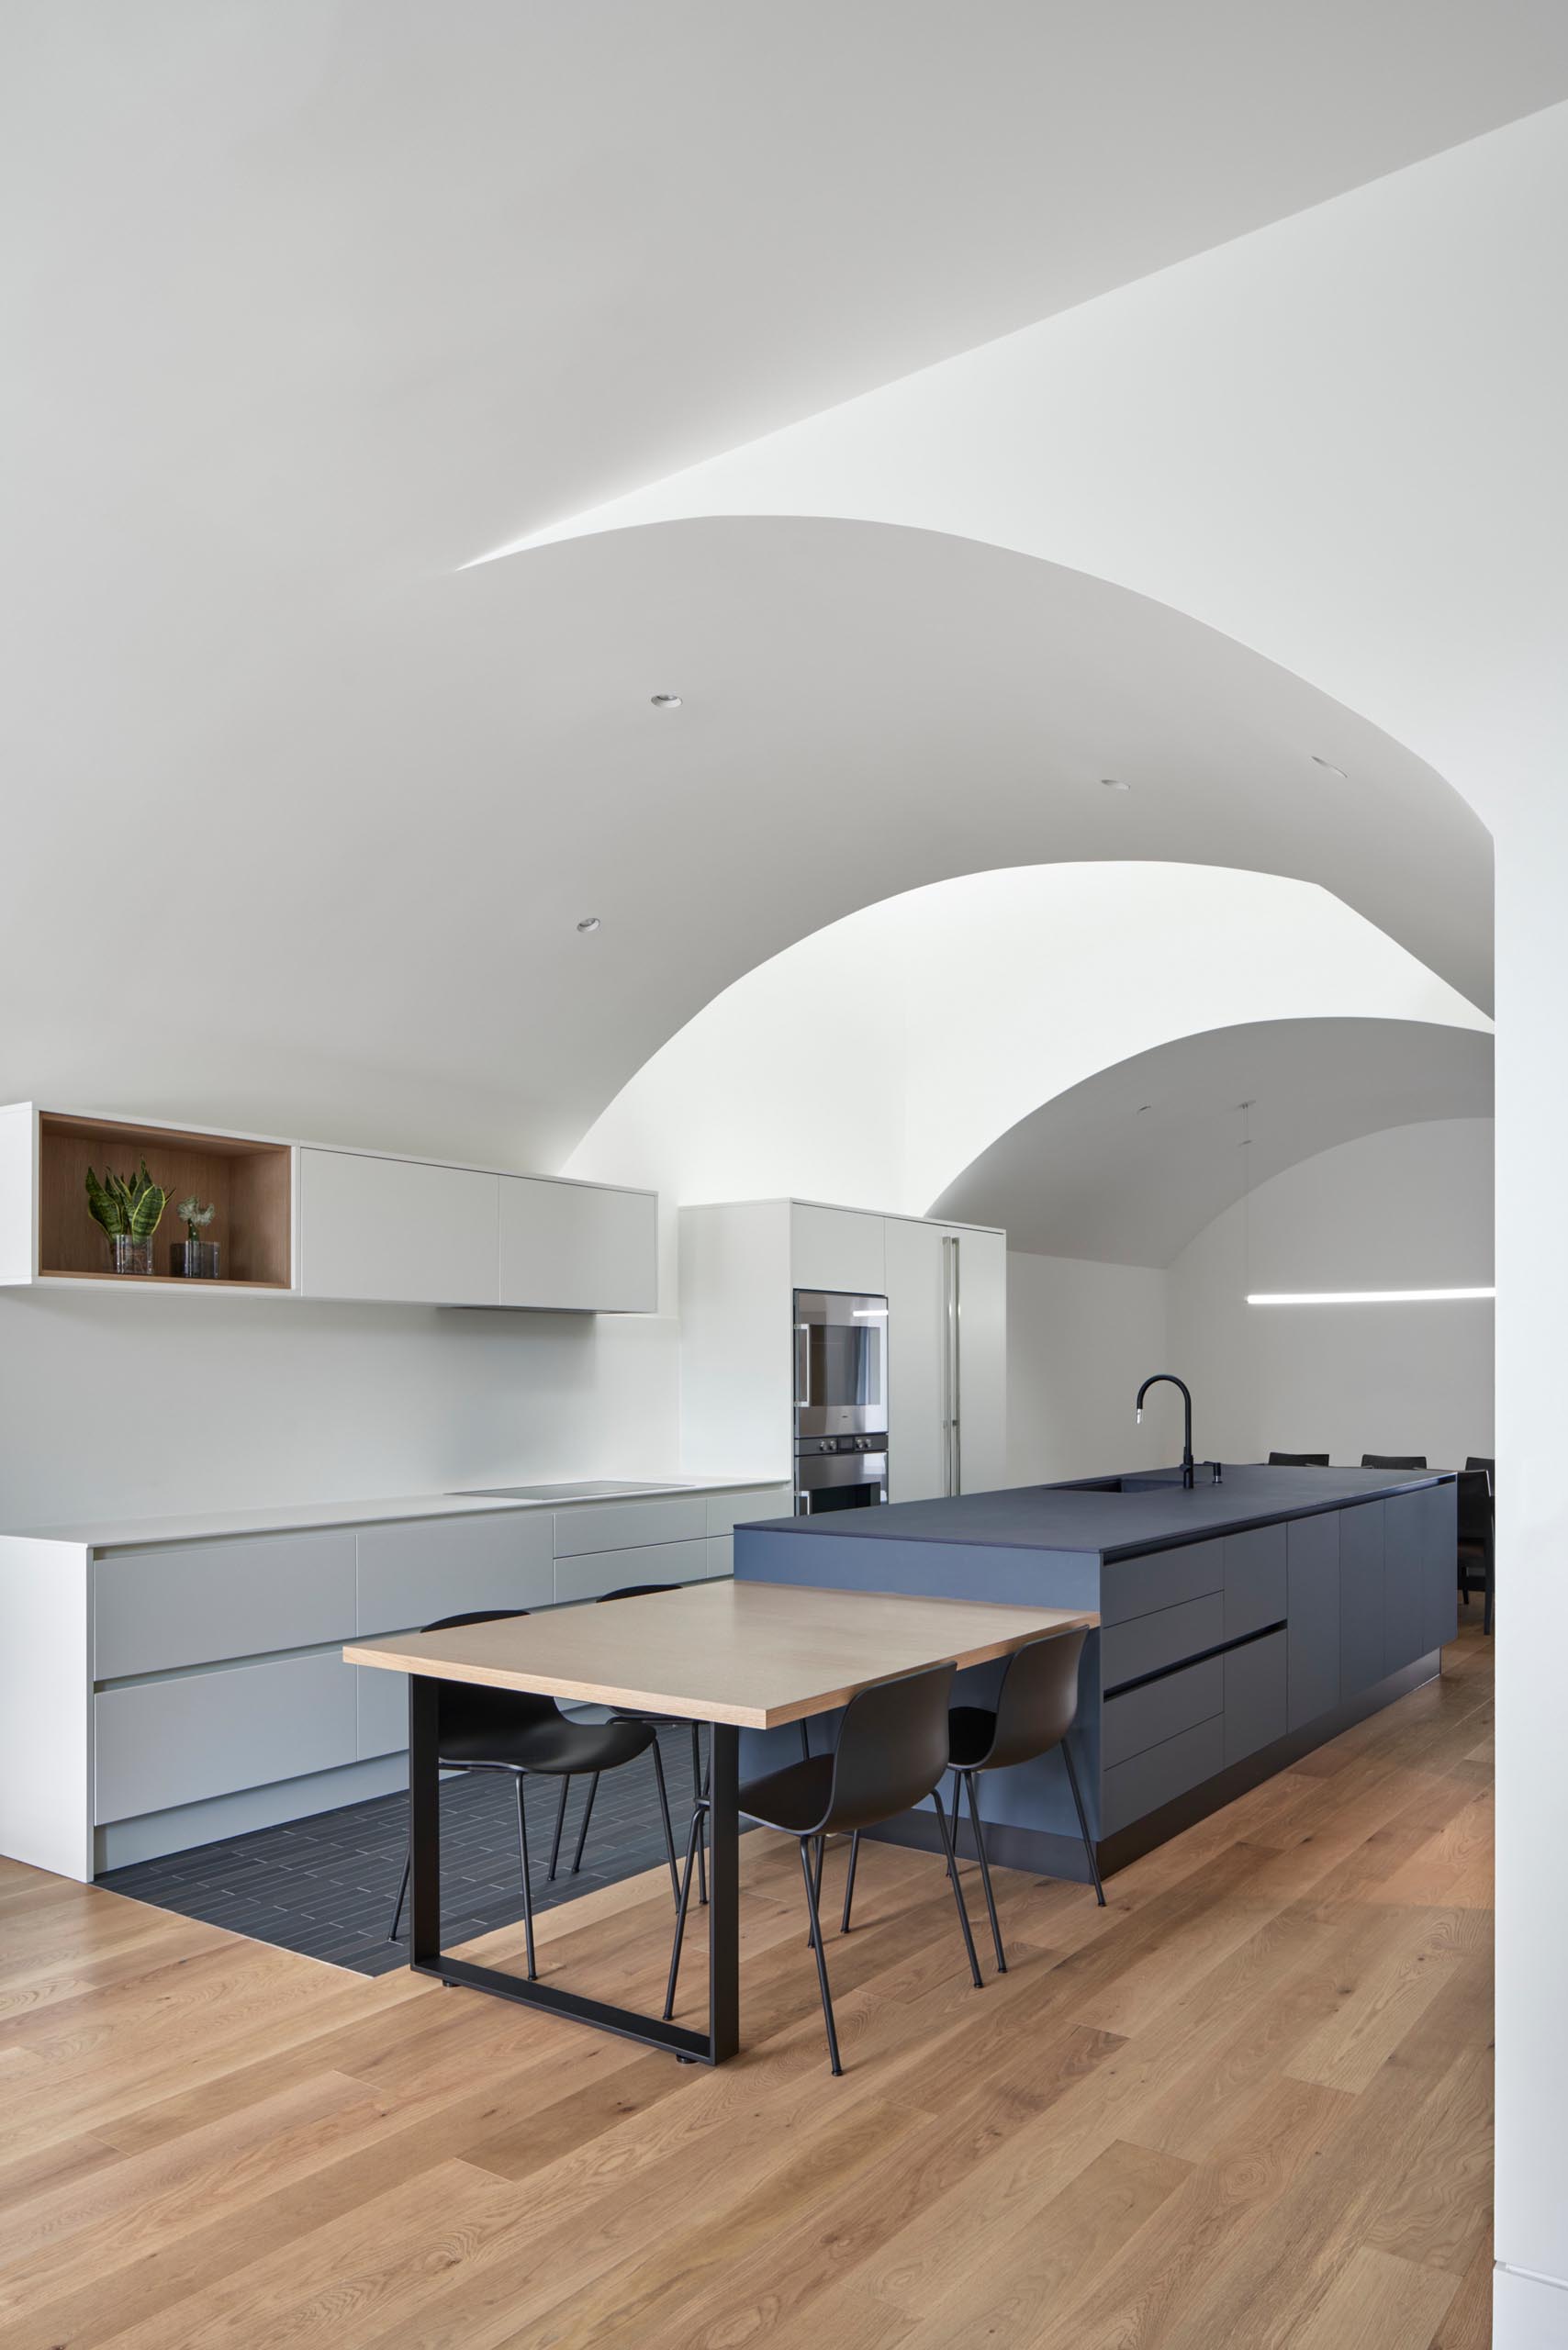 This kitchen, which has white minimalist cabinets that line the wall, and a matte blue kitchen island, also includes a more casual dining area by the living room.